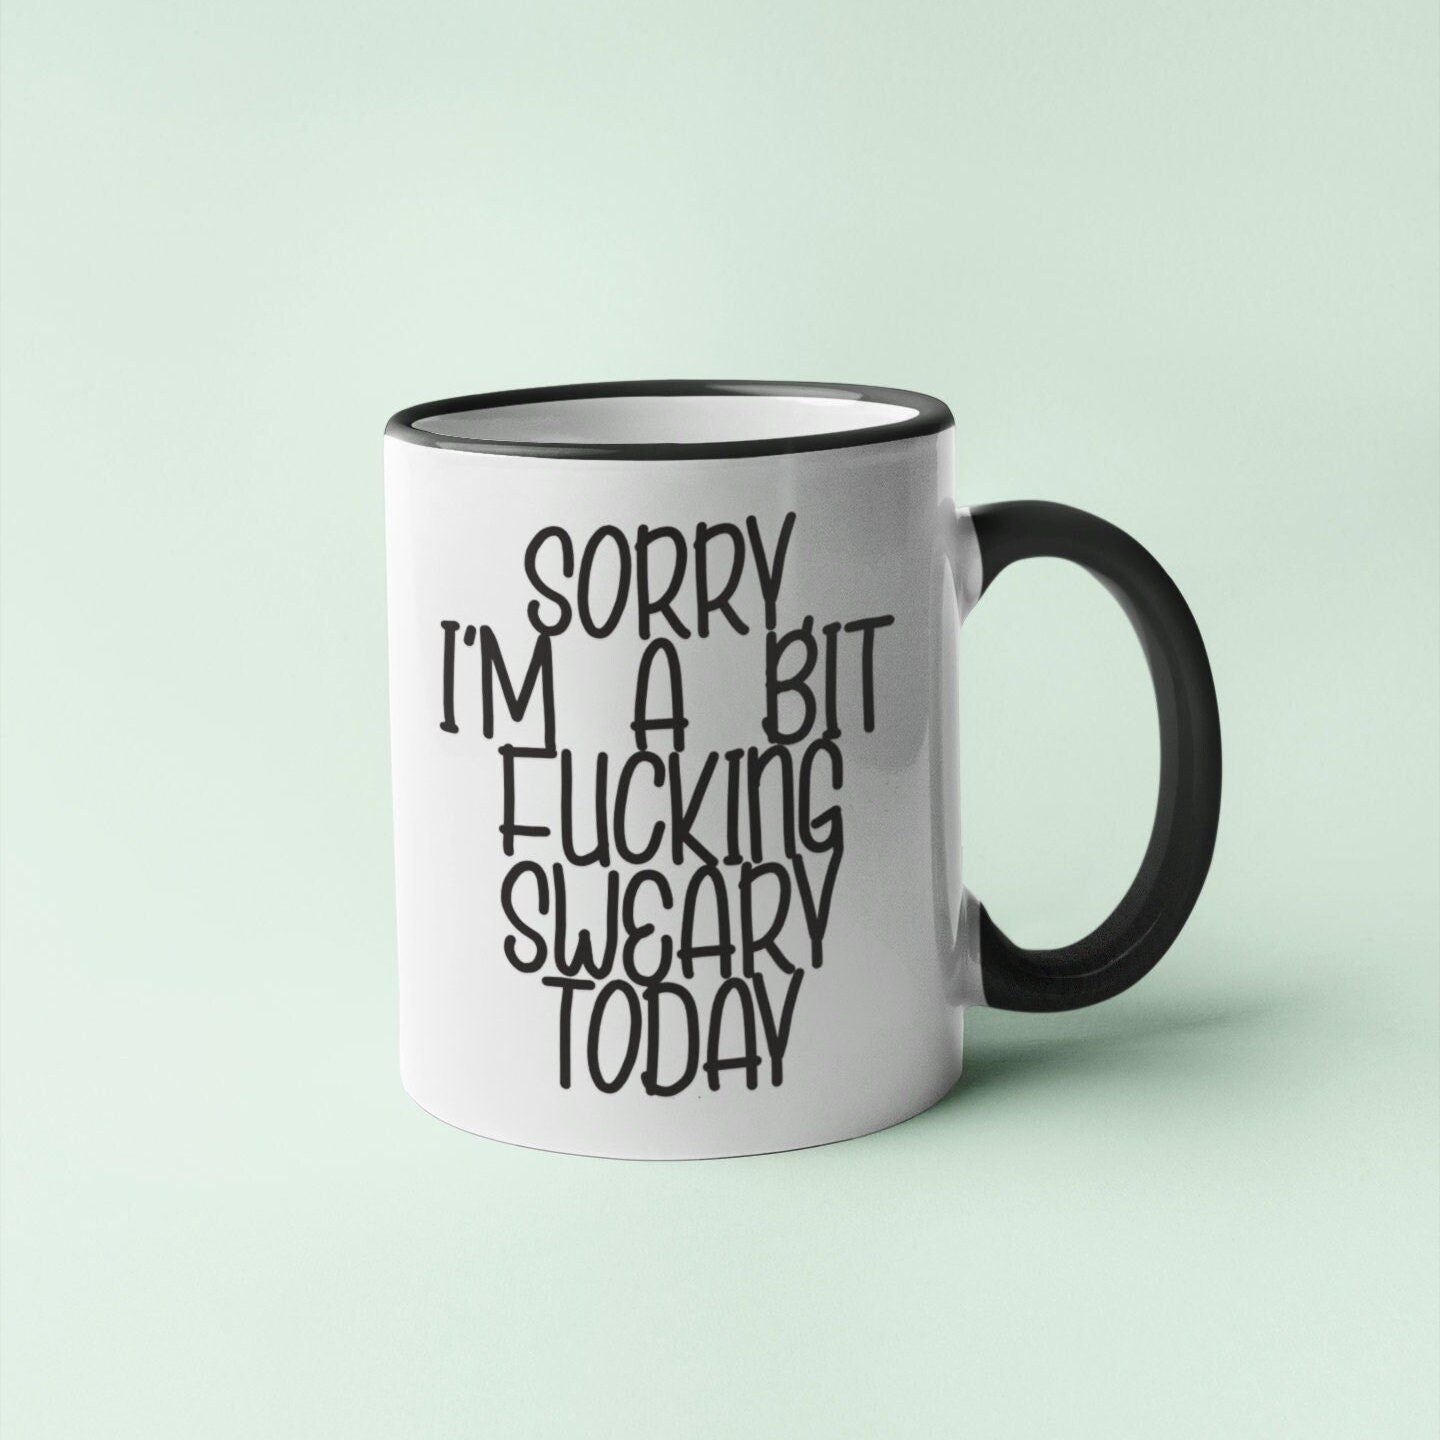 A white ceramic mug with a black handle, featuring the funny quote 'sorry i'm a bit fucking swearing today'. Printed in black ink.